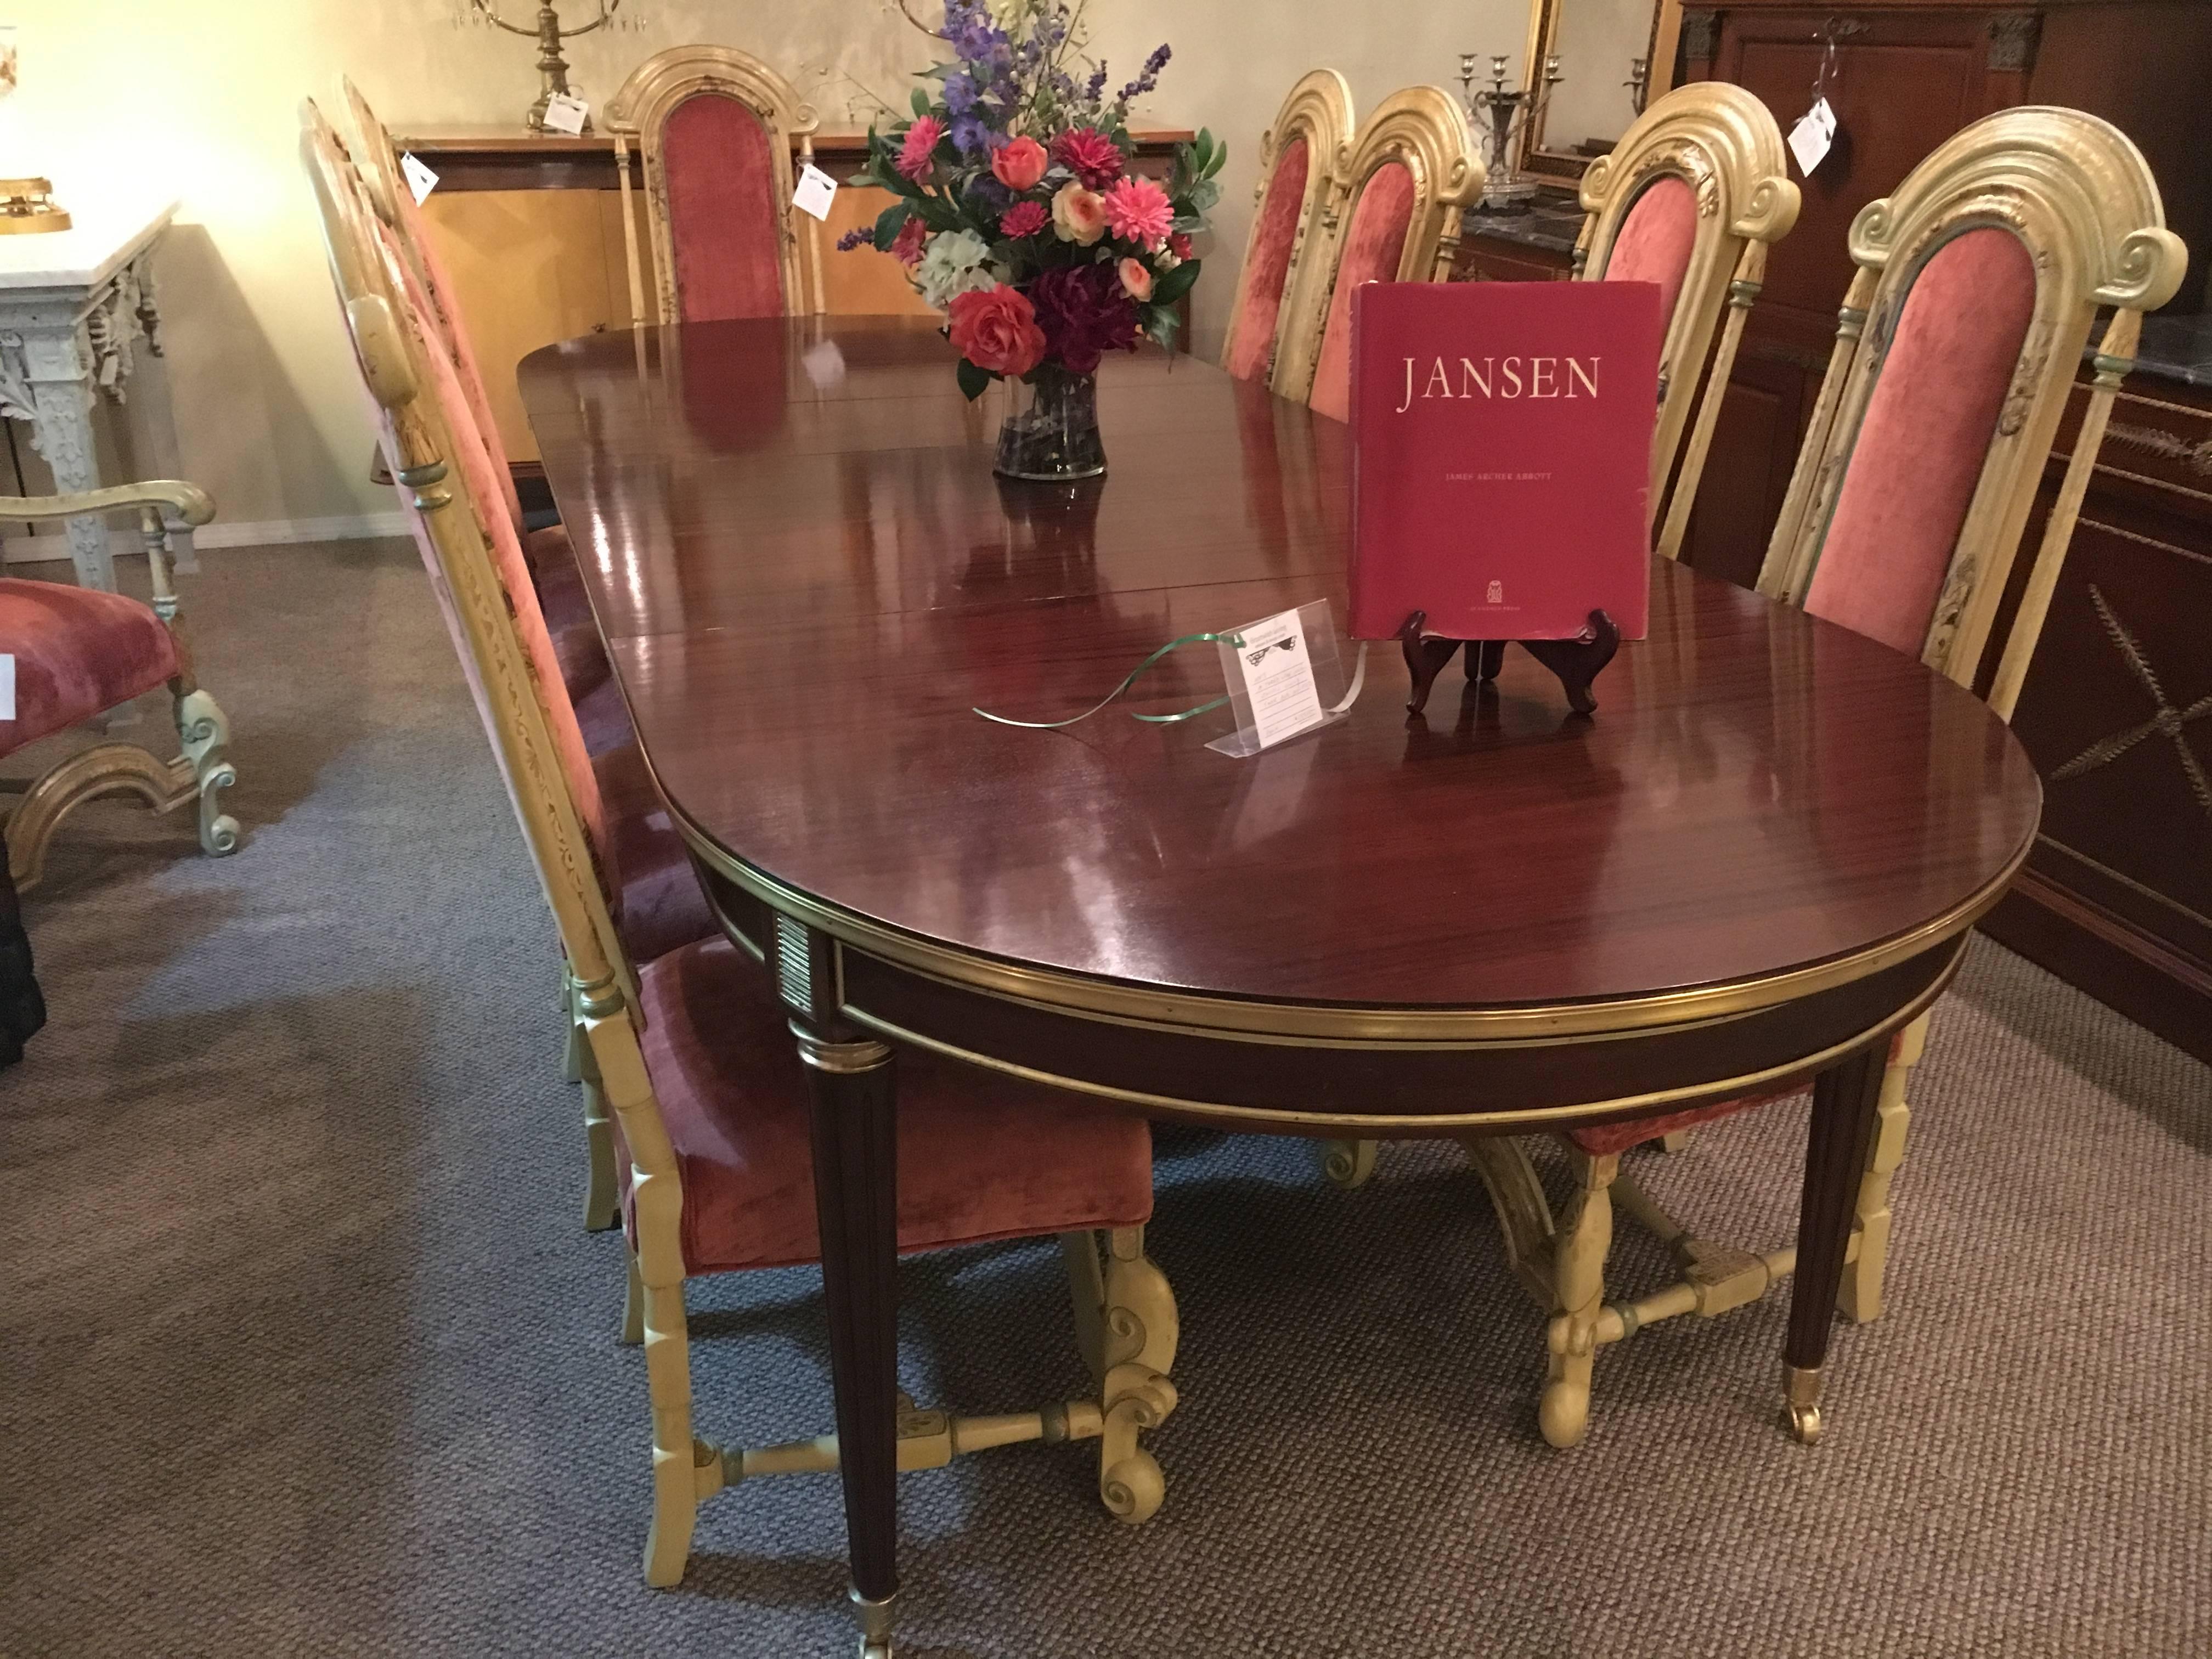 A two-leaf Maison Jansen style Rosewood Dining Table bronze-mounted. A fine Maison Jansen style dining table in the Louis XVI style. The tapering bronze-mounted legs with fluted design having bronze casters on sabots. The rosewood apron with